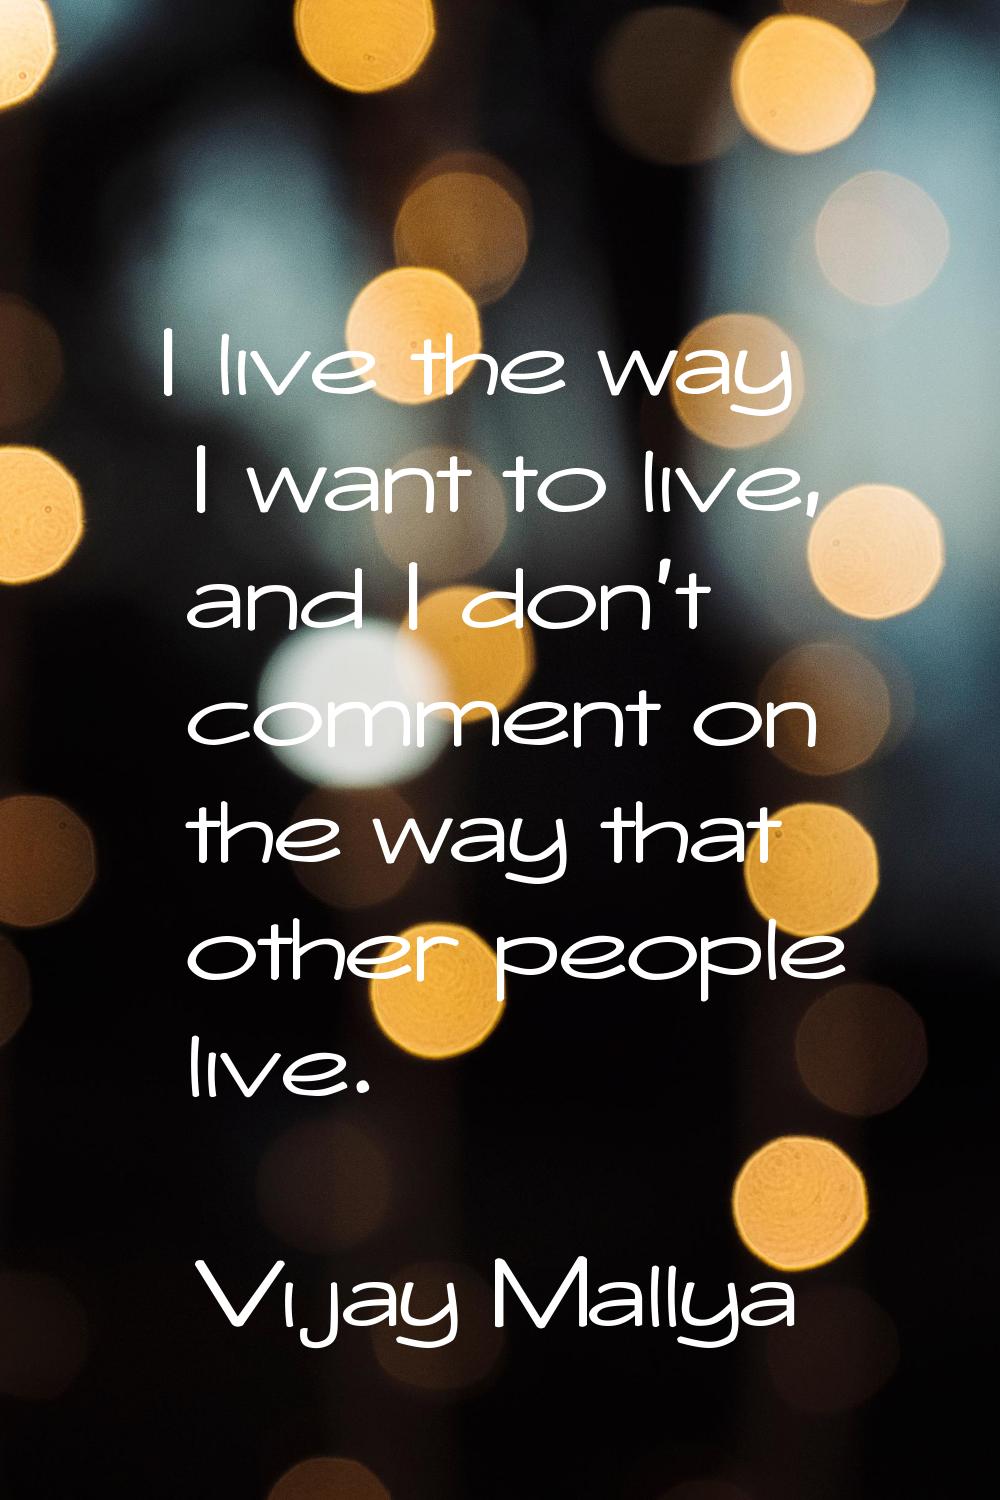 I live the way I want to live, and I don't comment on the way that other people live.